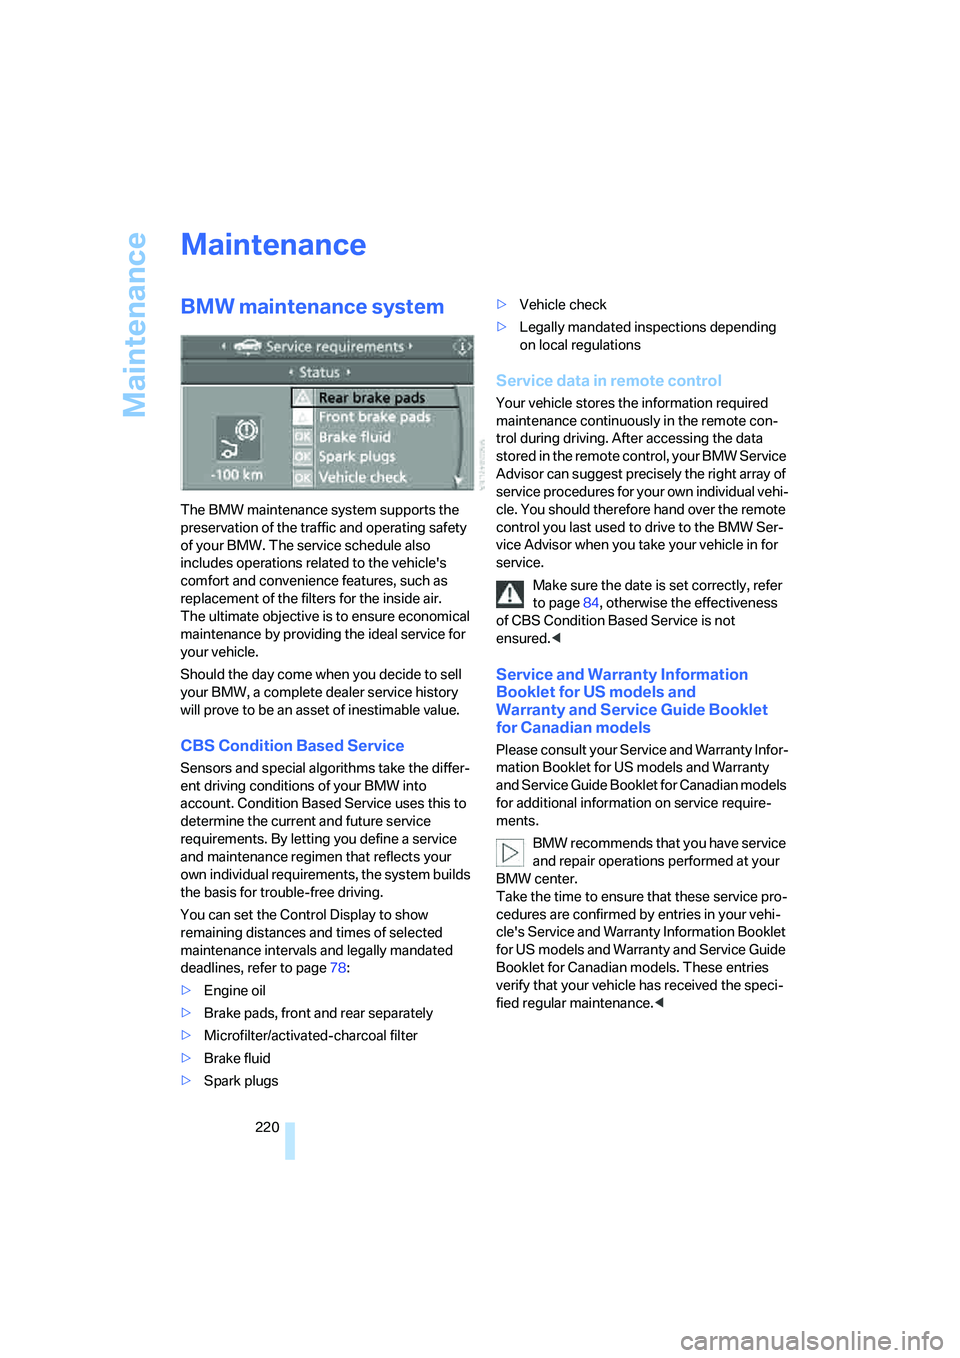 BMW 525XI 2007  Owners Manual Maintenance
220
Maintenance
BMW maintenance system
The BMW maintenance system supports the 
preservation of the traffic and operating safety 
of your BMW. The service schedule also 
includes operation